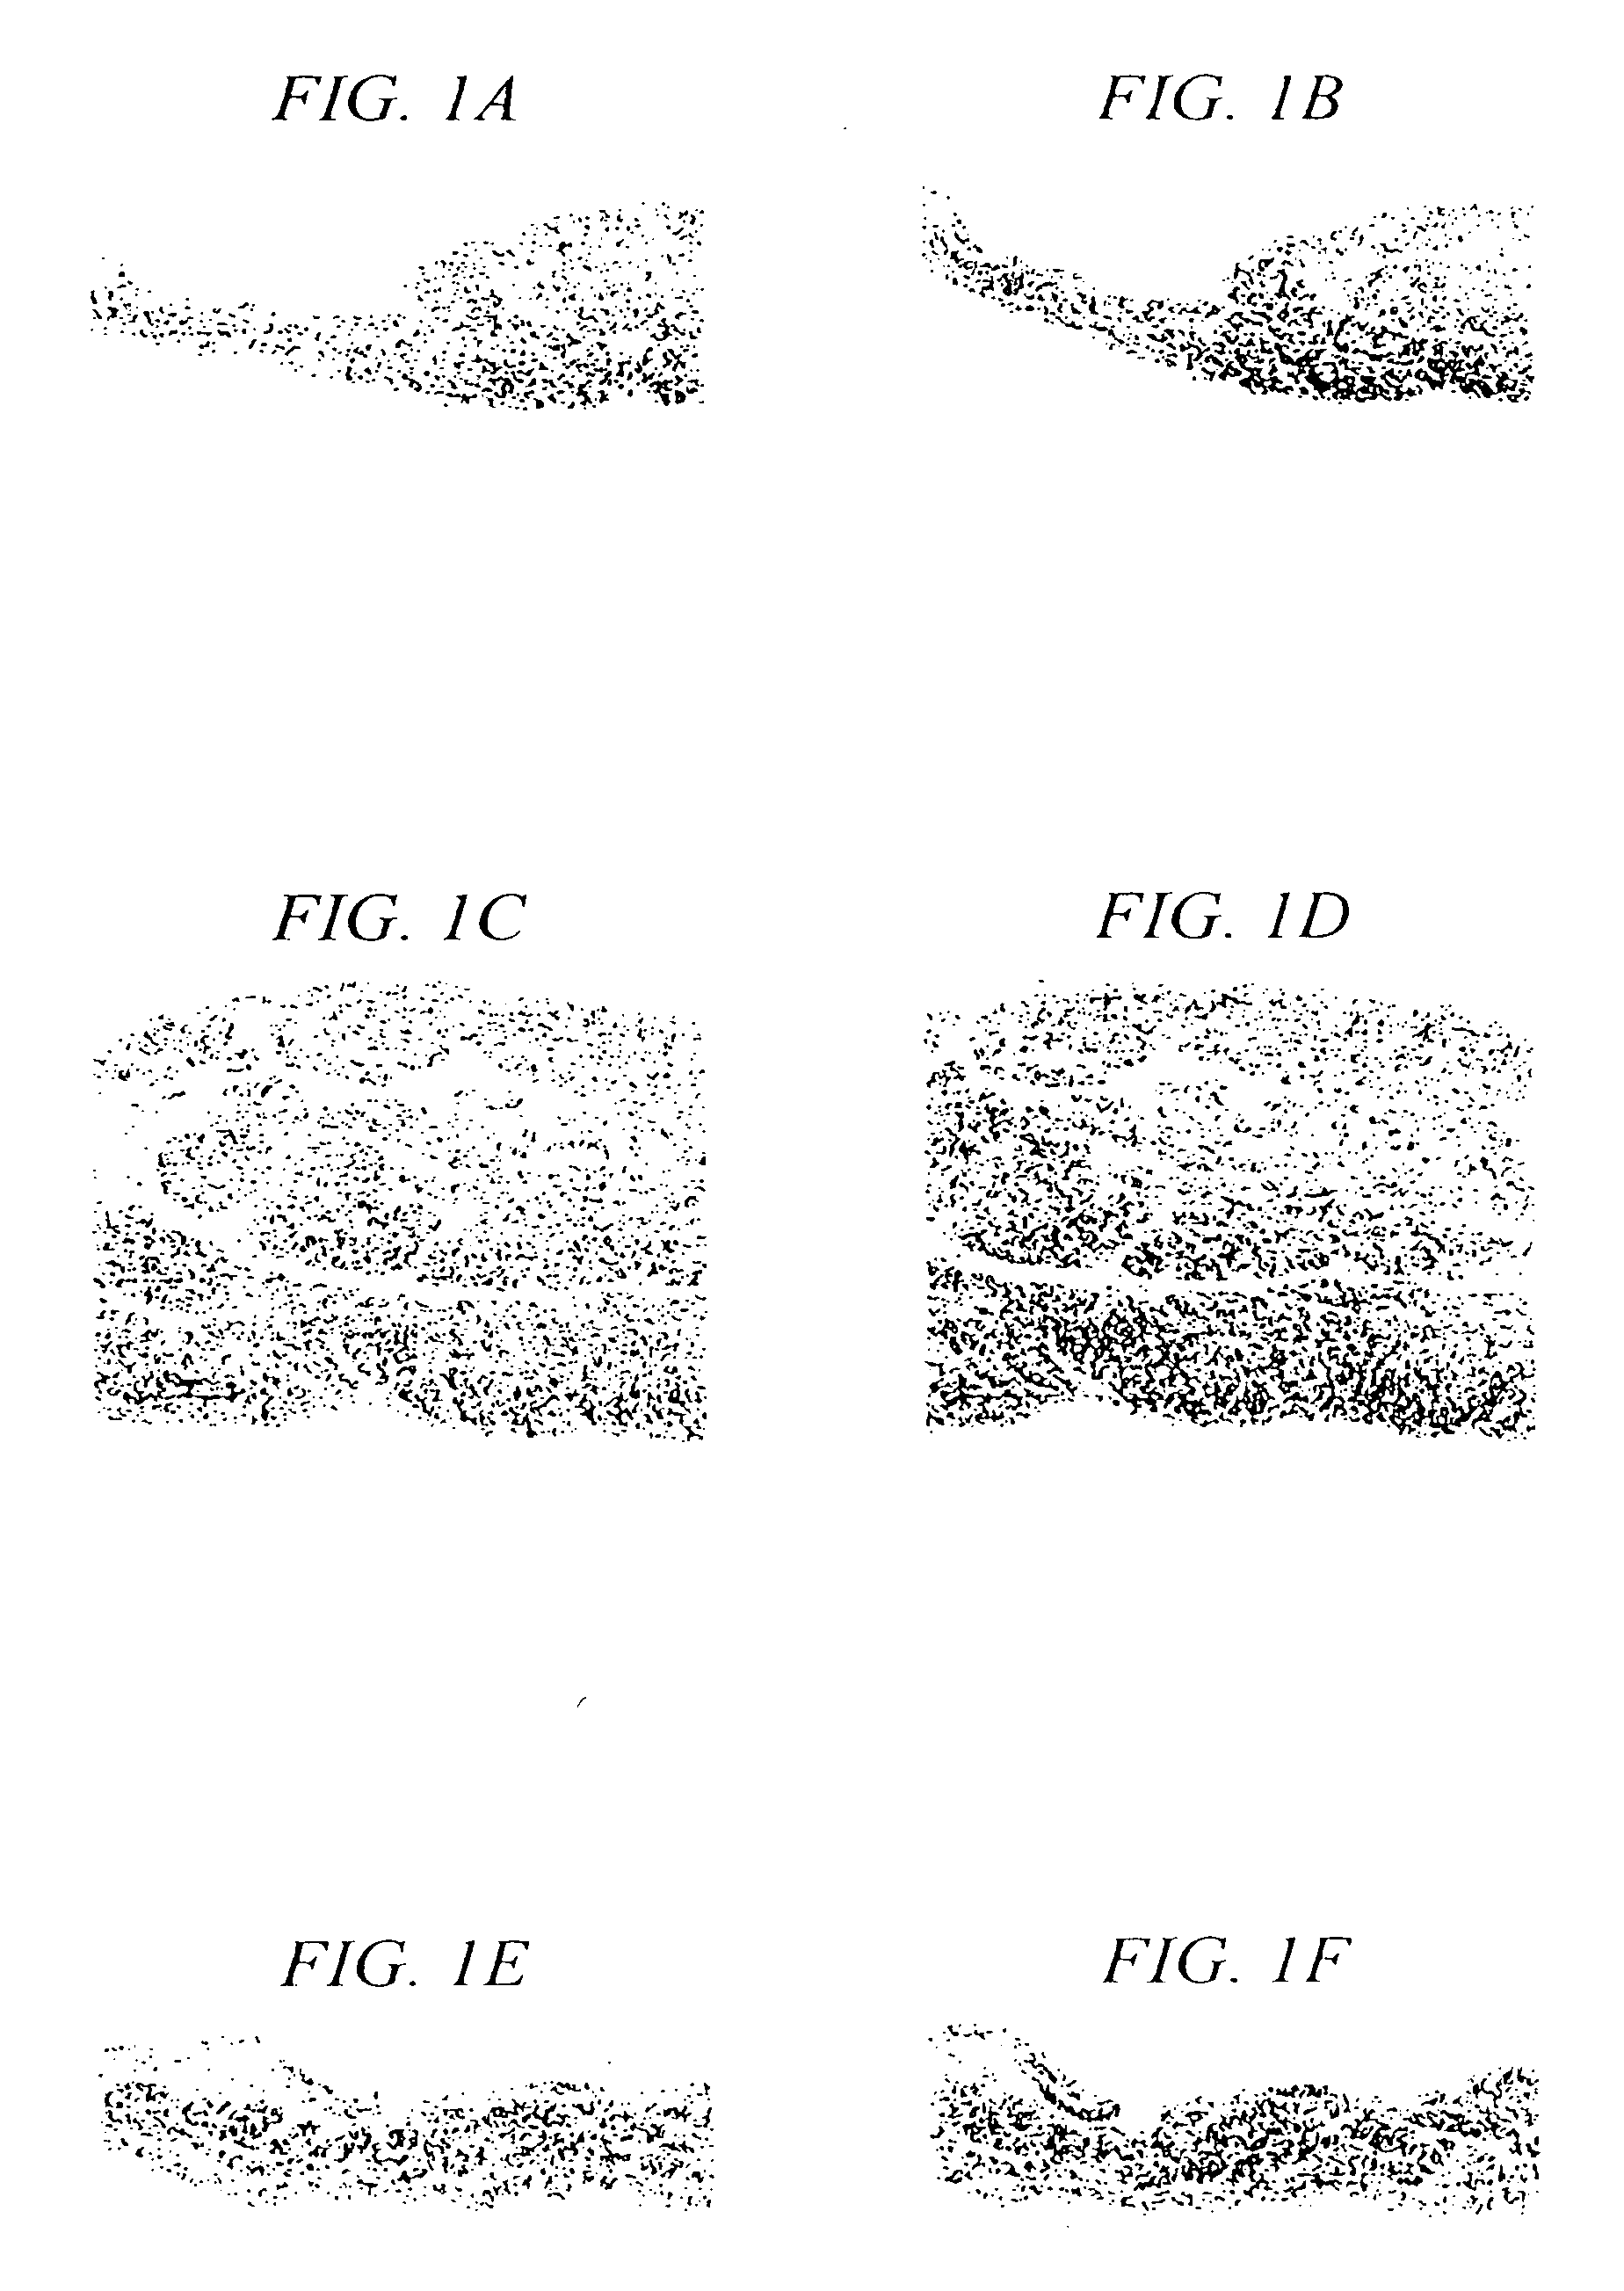 Method and apparatus for locating the fossa ovalis and performing transseptal puncture